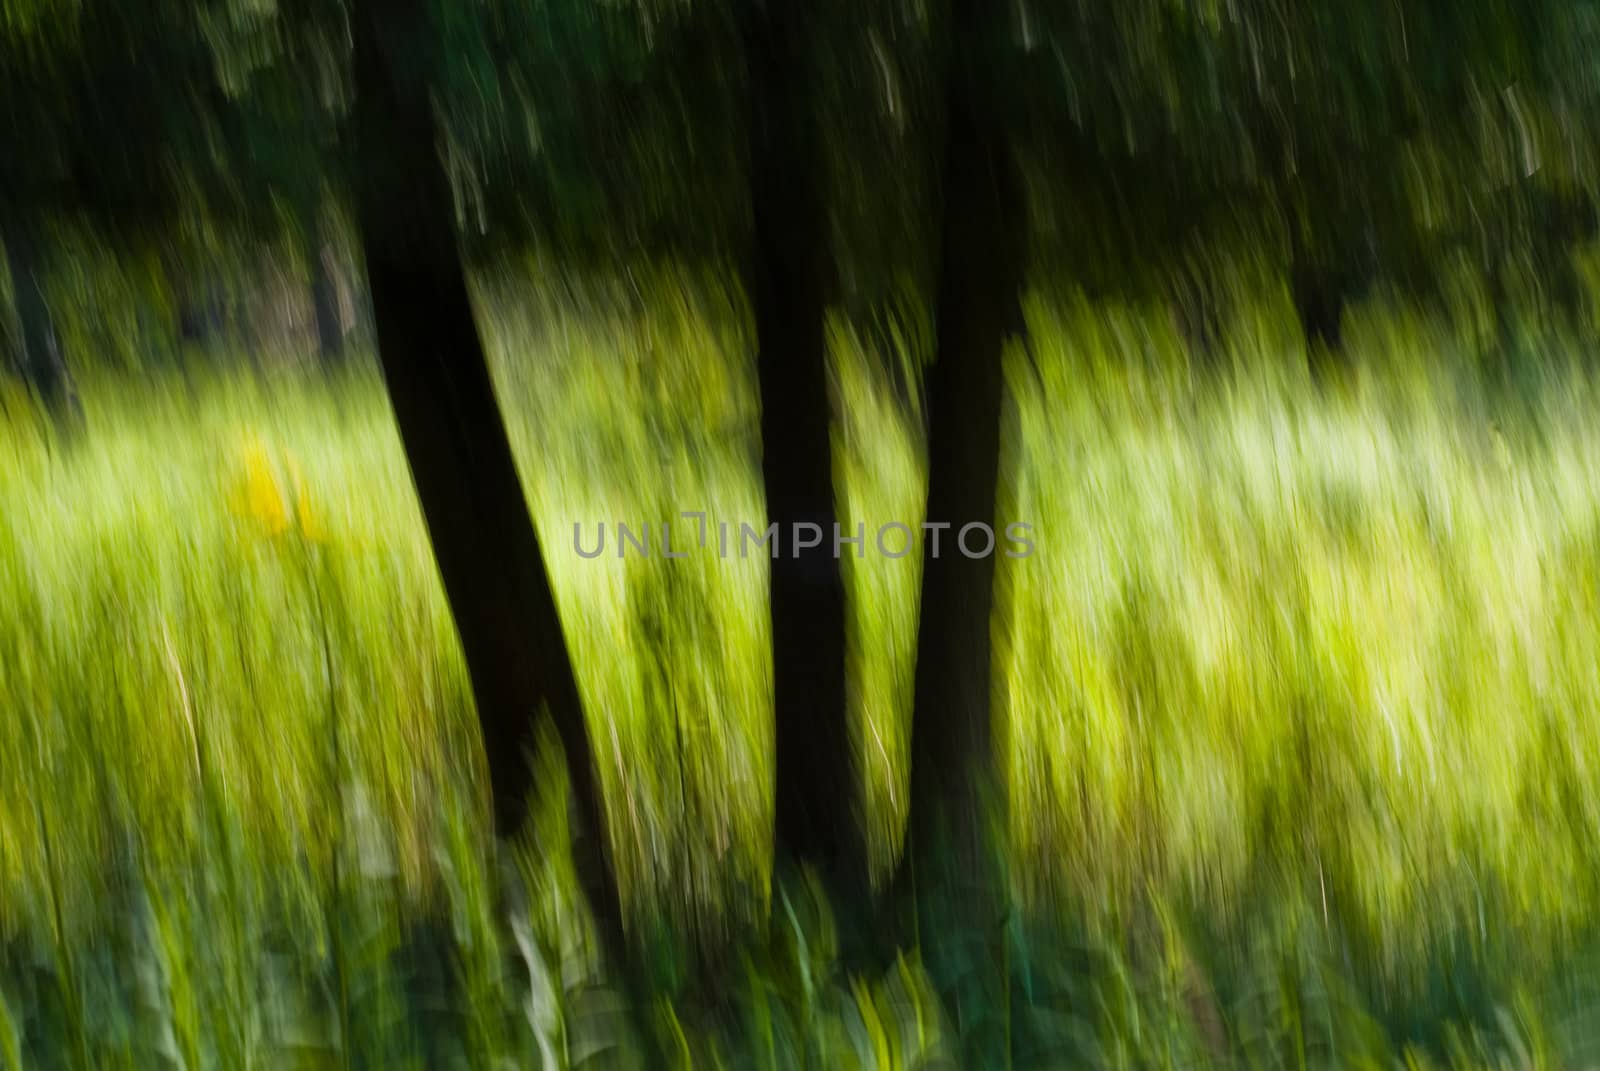 Abstract image of trees.